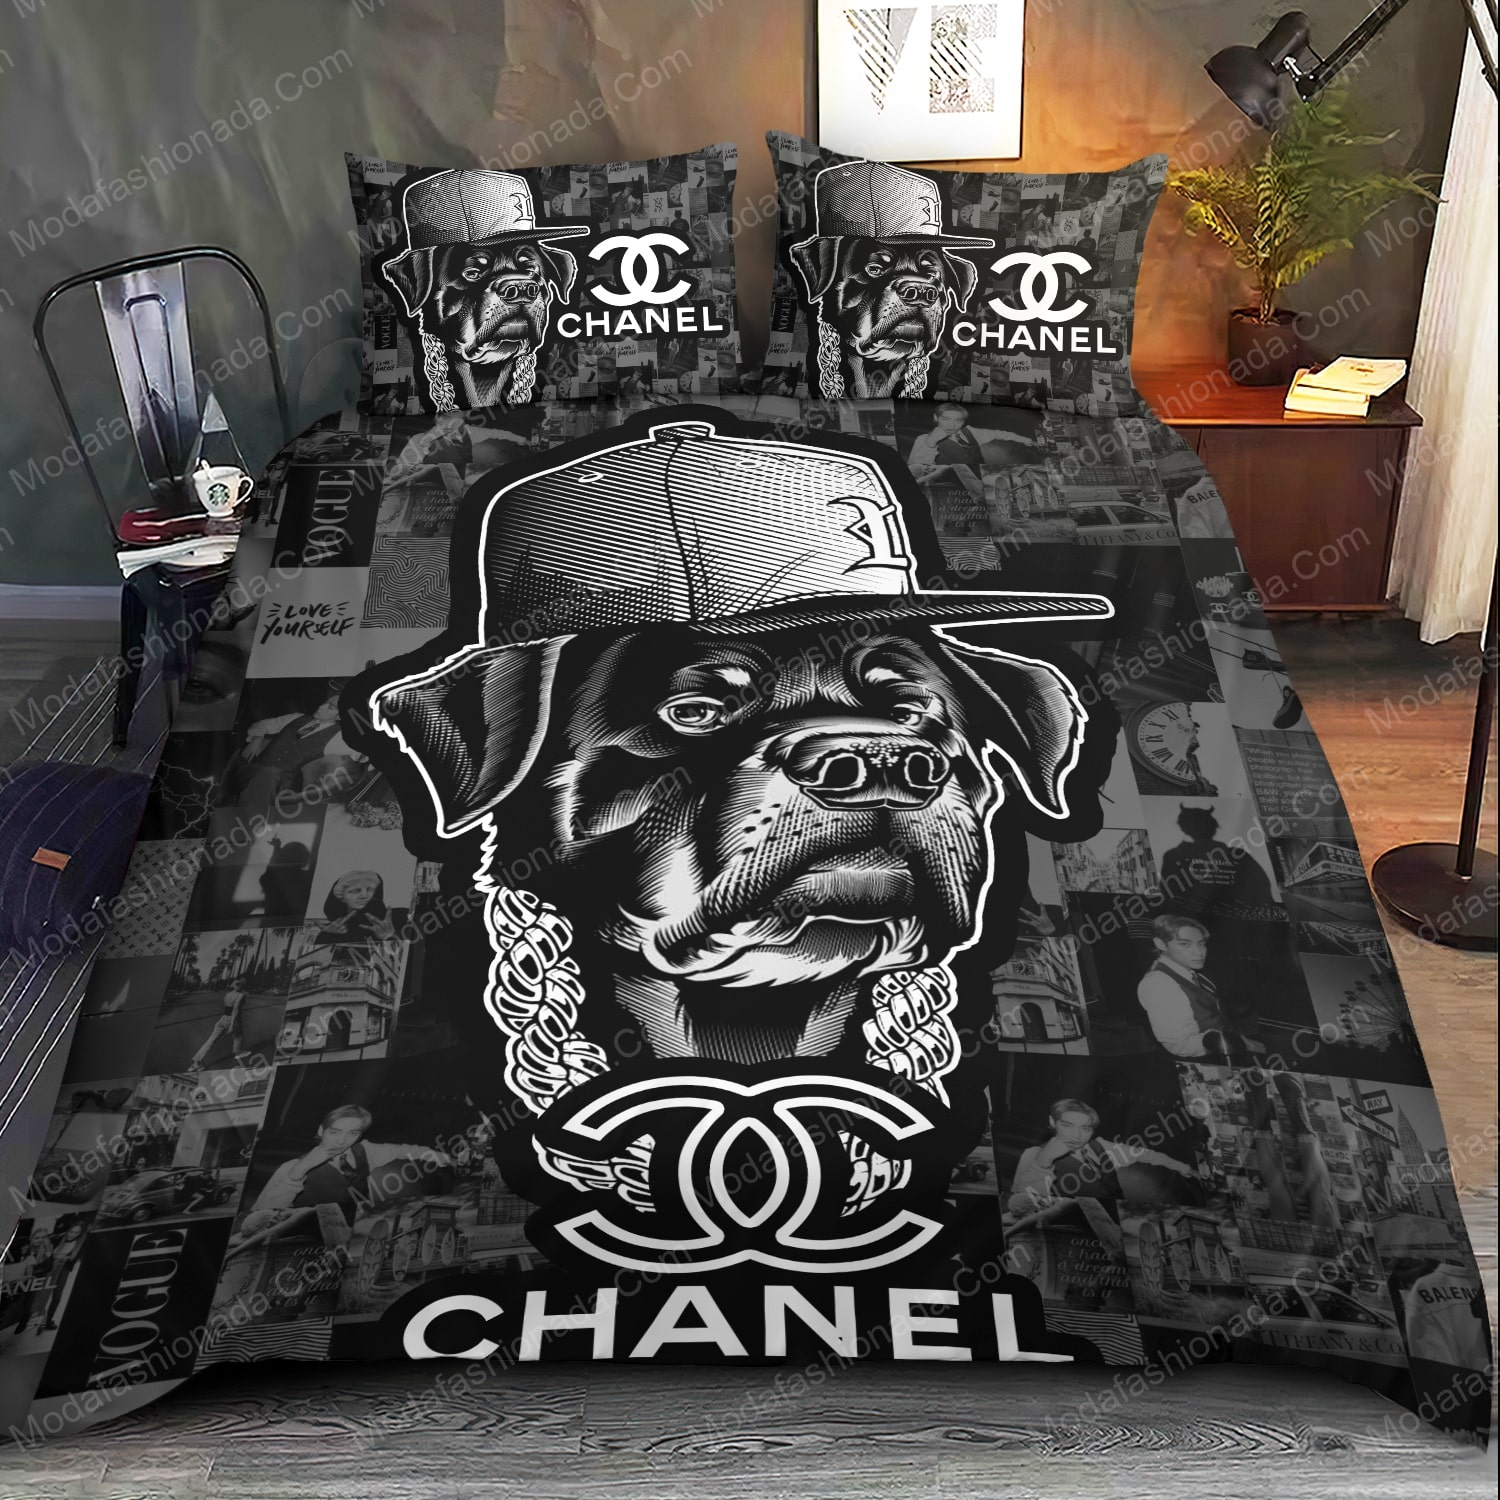 Buy Rotweller Chanel Bedding Sets Bed Sets With Twin, Full, Queen, King ...